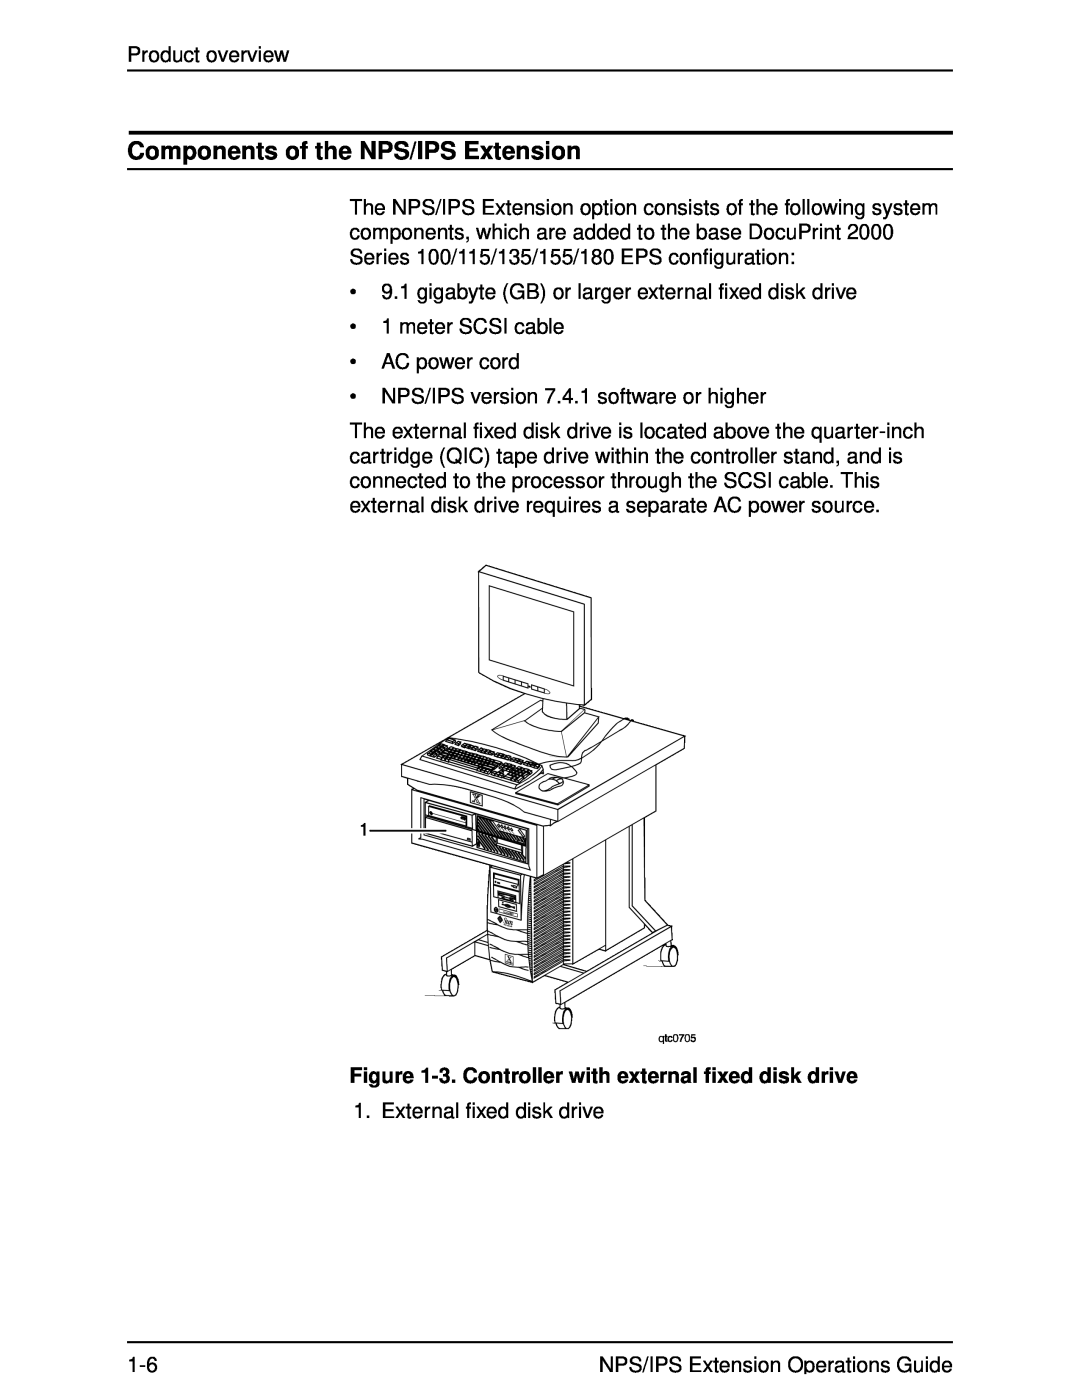 Xerox 2000 Series manual Components of the NPS/IPS Extension 